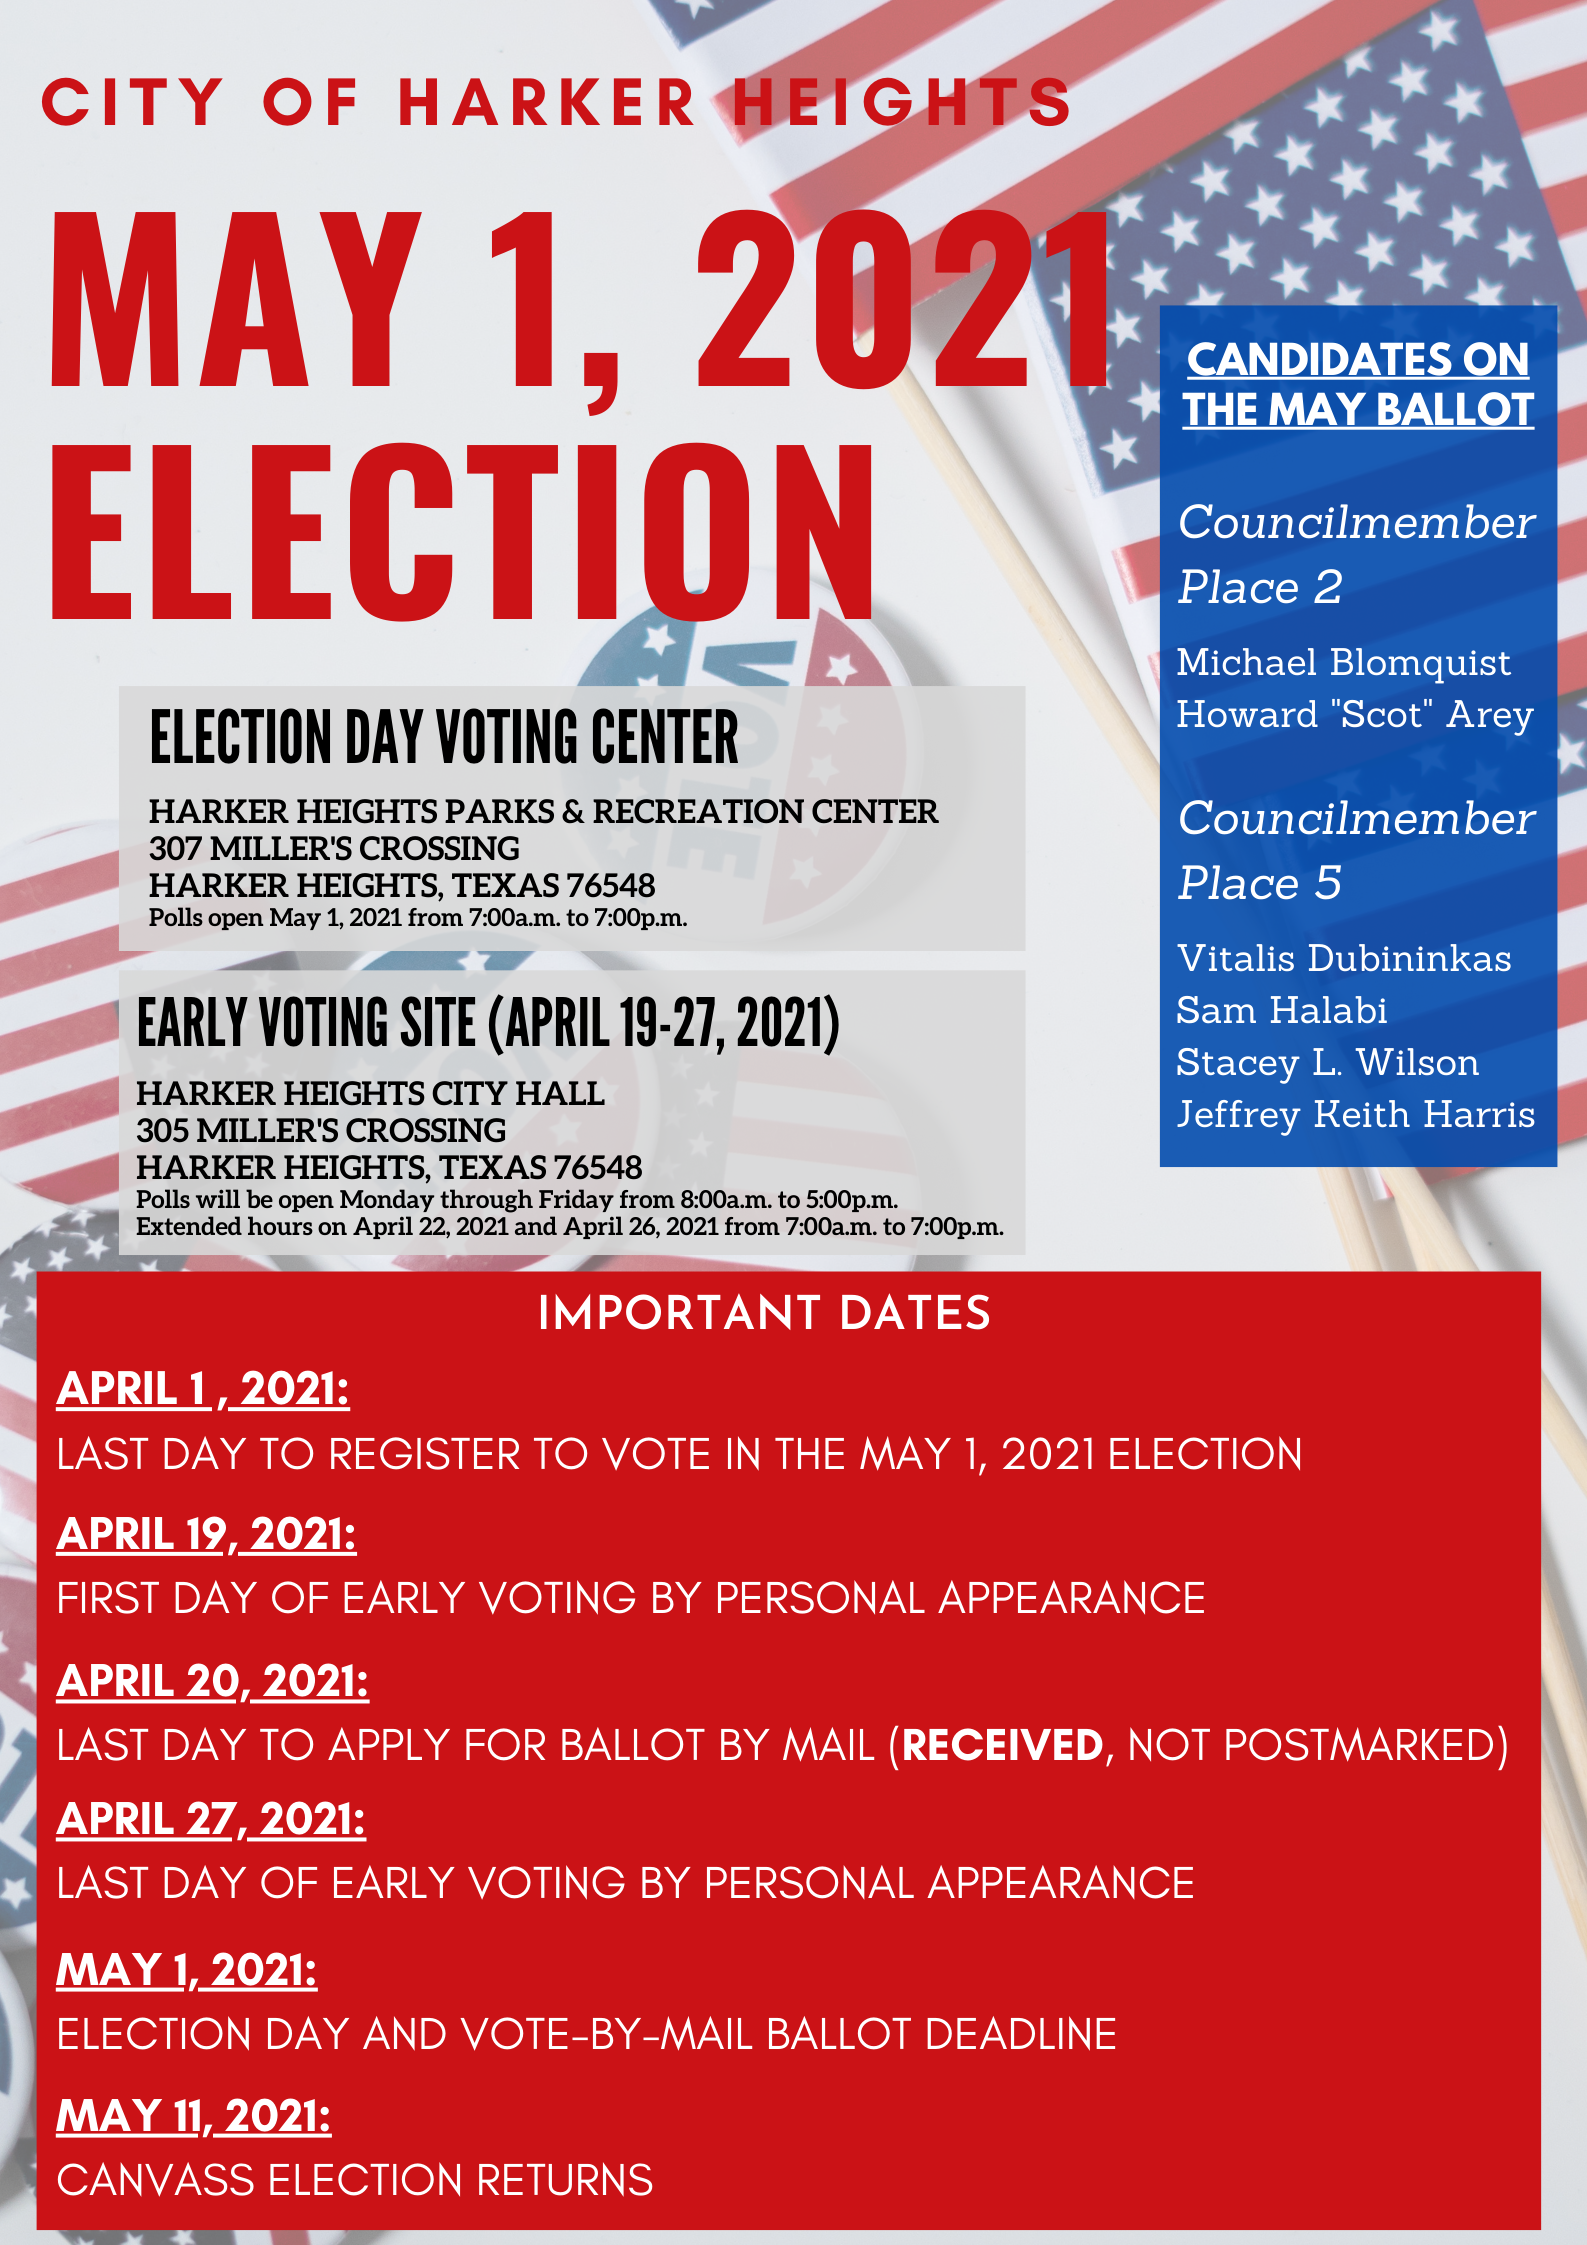 City of Harker Heights 2021 General Election Dates